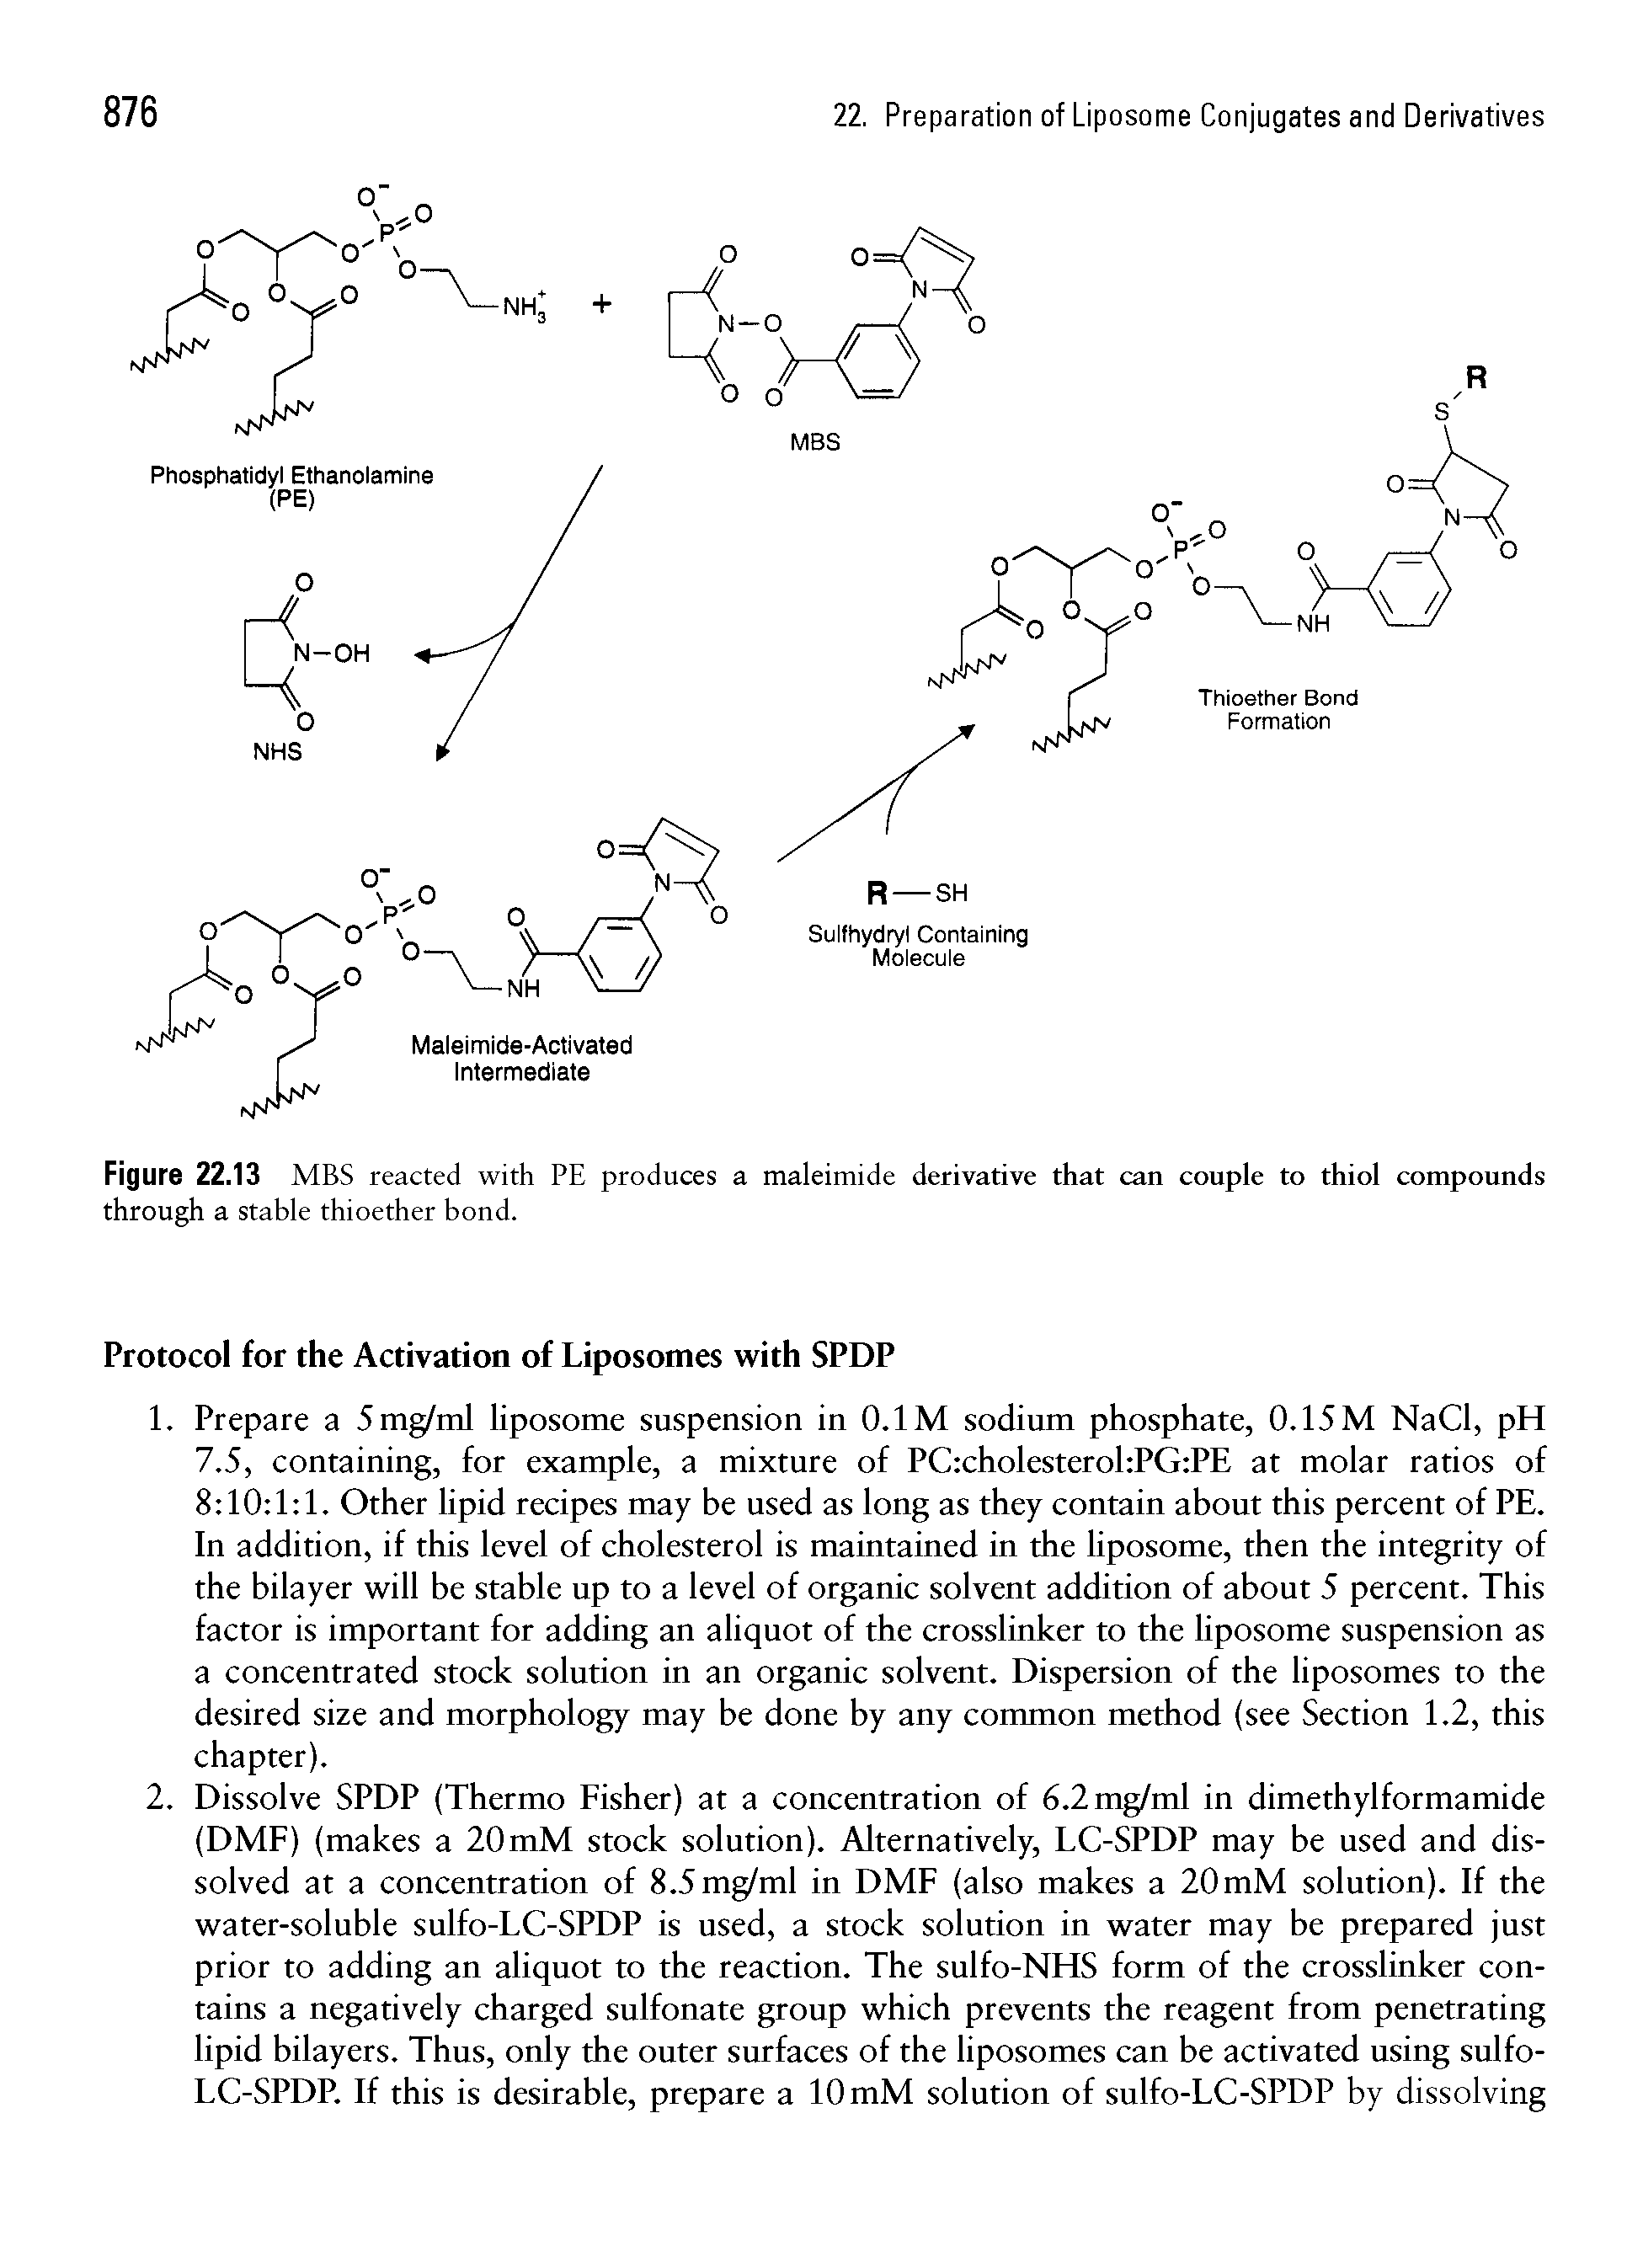 Figure 22.13 MBS reacted with PE produces a maleimide derivative that can couple to thiol compounds through a stable thioether bond.